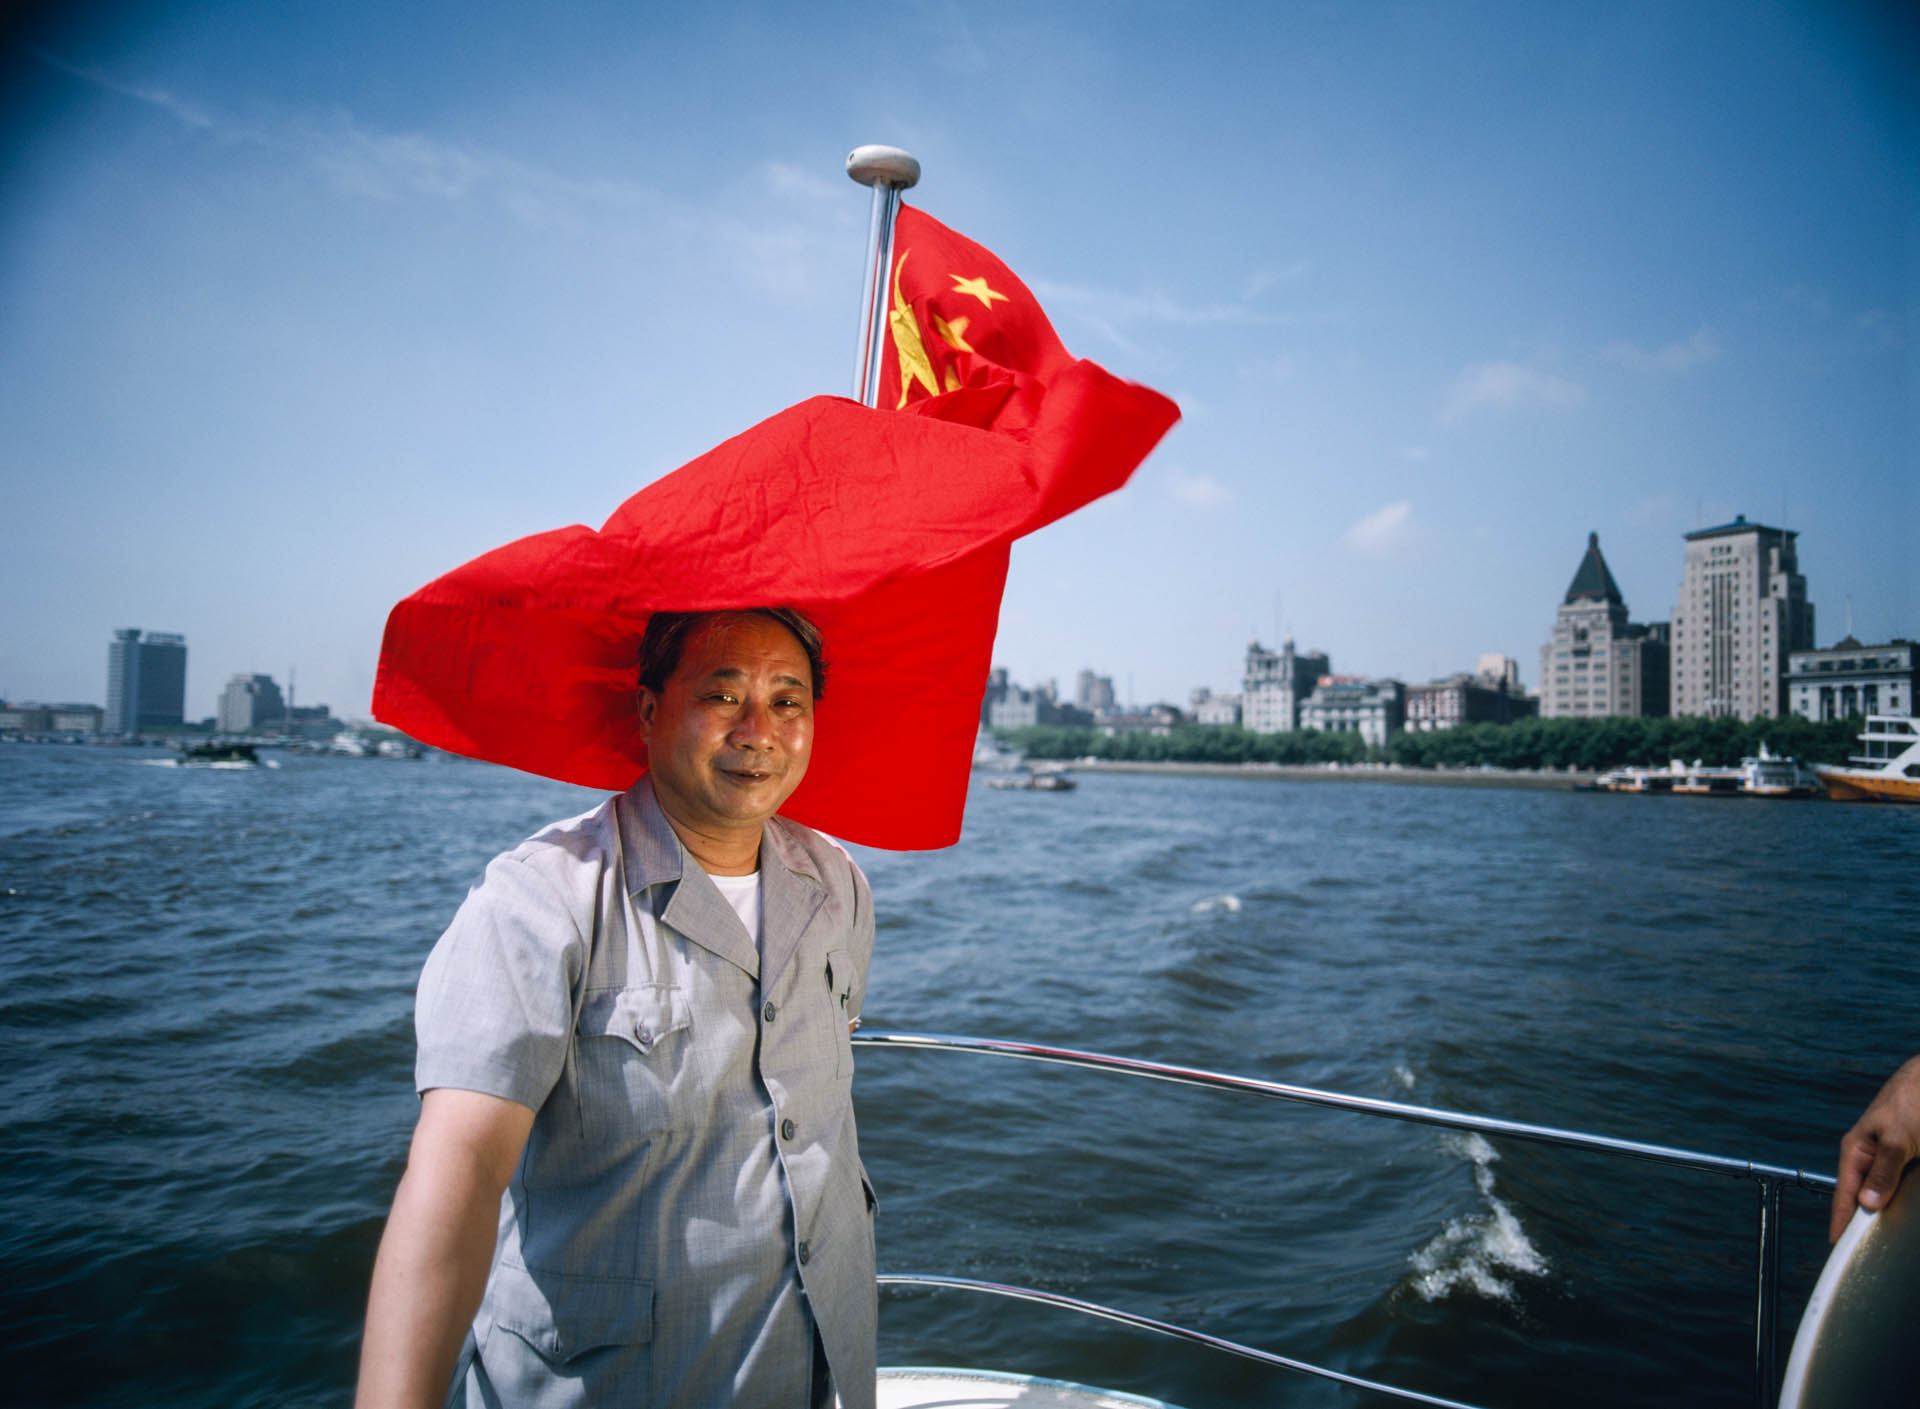  Shanghai, China - June 1988. In 1983 Yan Runtian became the General Manager of the Shanghai Harbor Company and he has been nicknamed "the gatekeeper of China".&nbsp; 